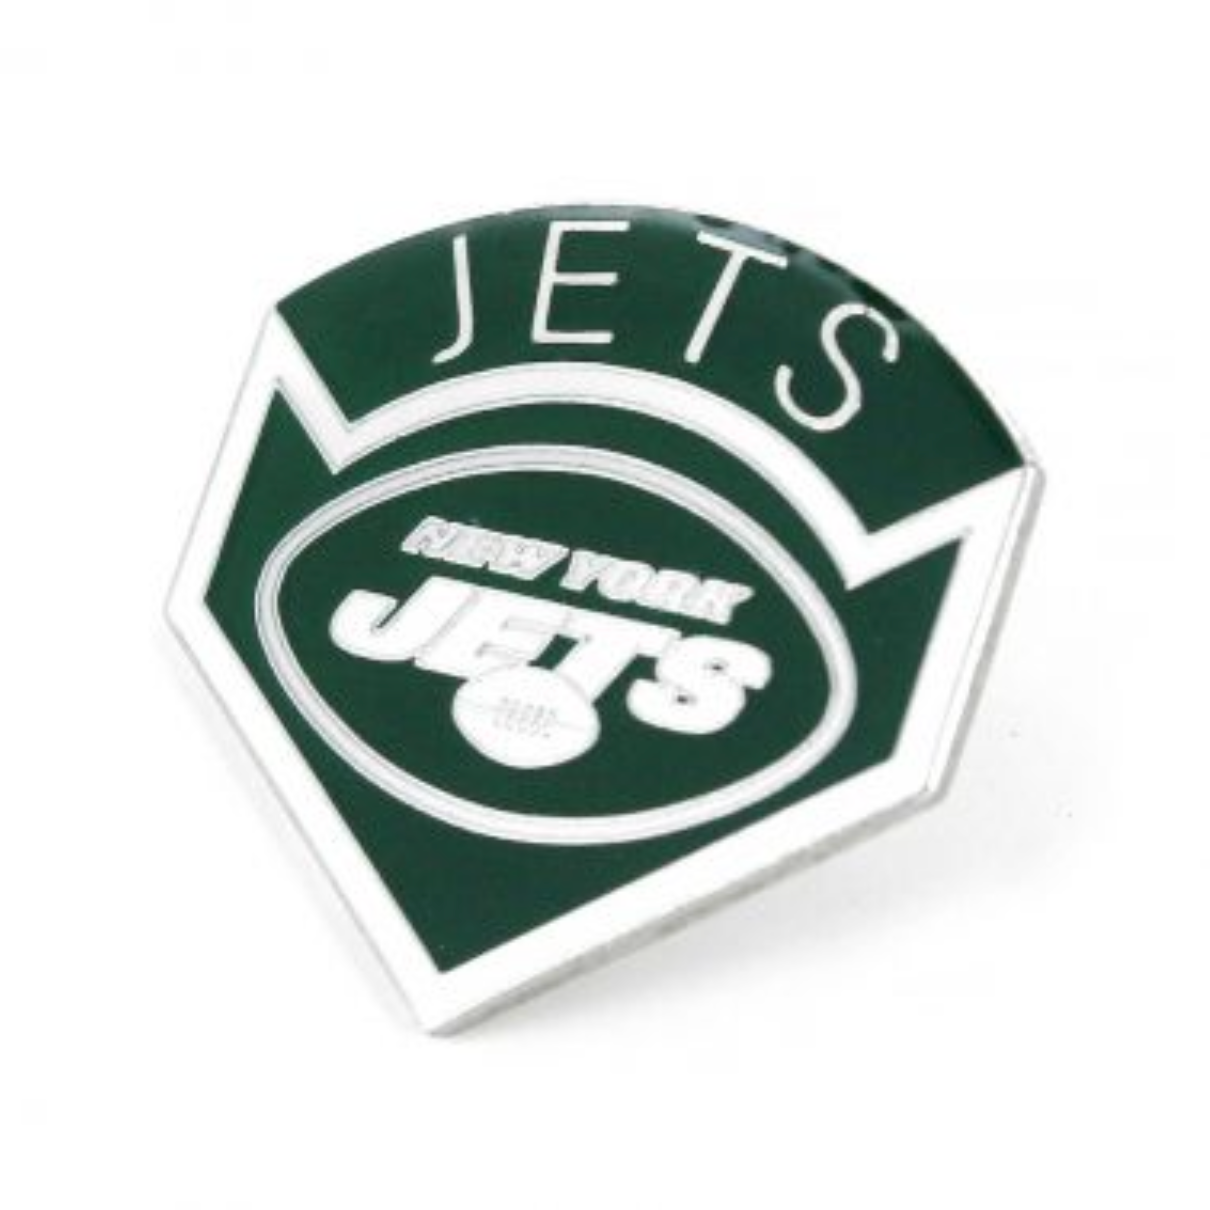 Pin Metálico Aminco NFL Triumph Jets